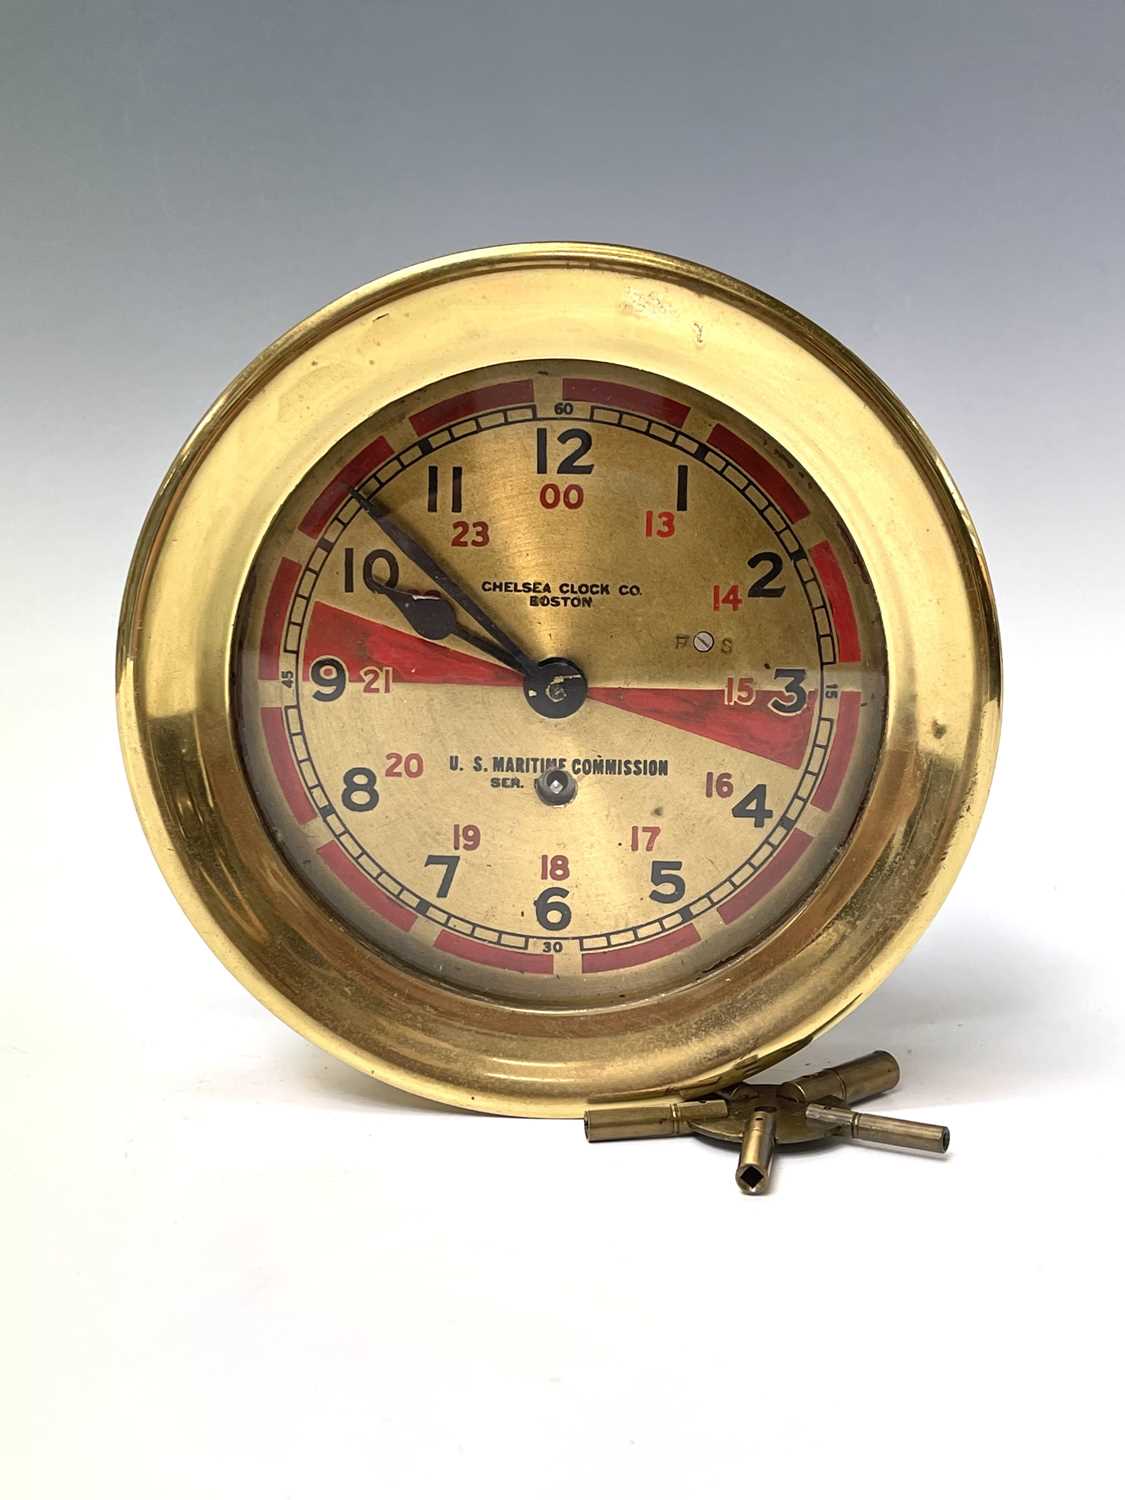 A U.S. Maritme Commision ship's radio room clock, by The Chelsea Clock Co, Boston, the brass dial